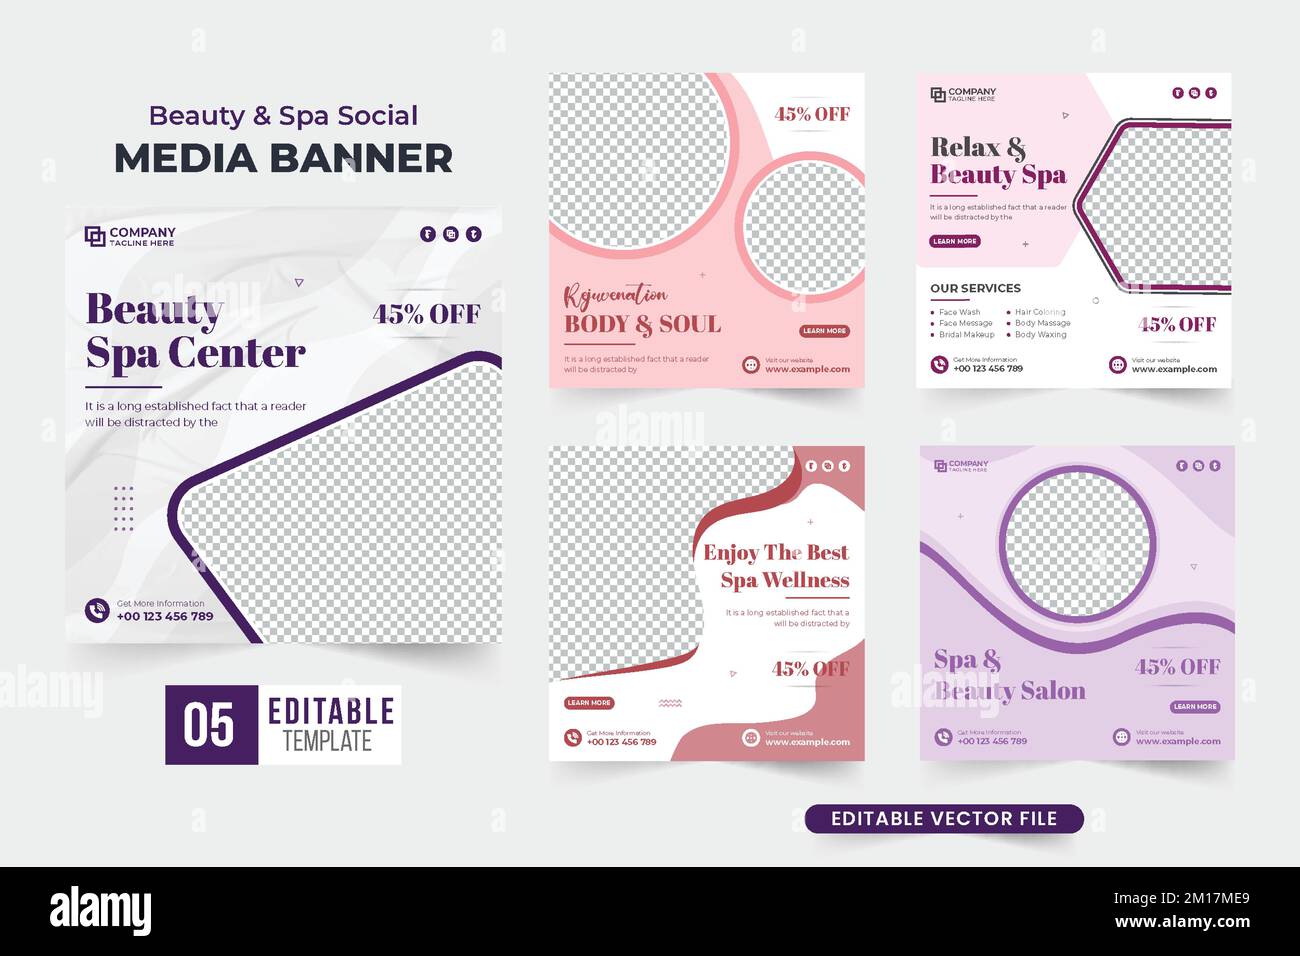 Spa business advertisement poster template collection for digital marketing. Beauty parlor promotional web banner bundle for social media. Special bea Stock Vector